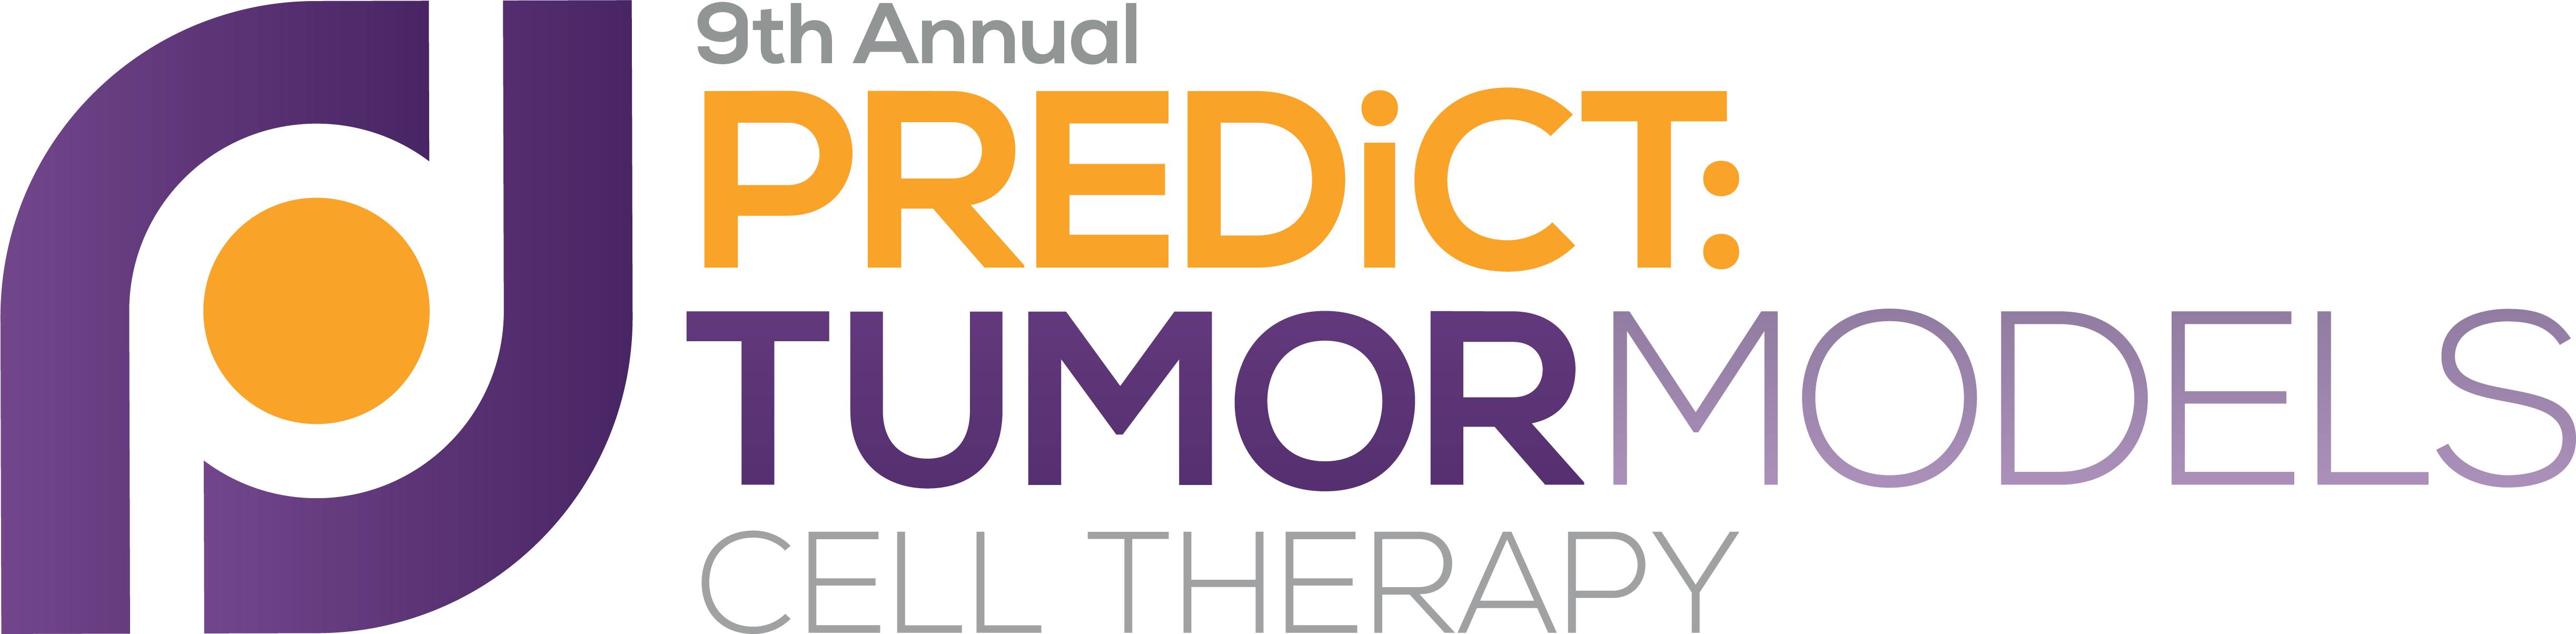 HW210203 PREDiCT Tumor Models Cell Therapy logo_Yellow